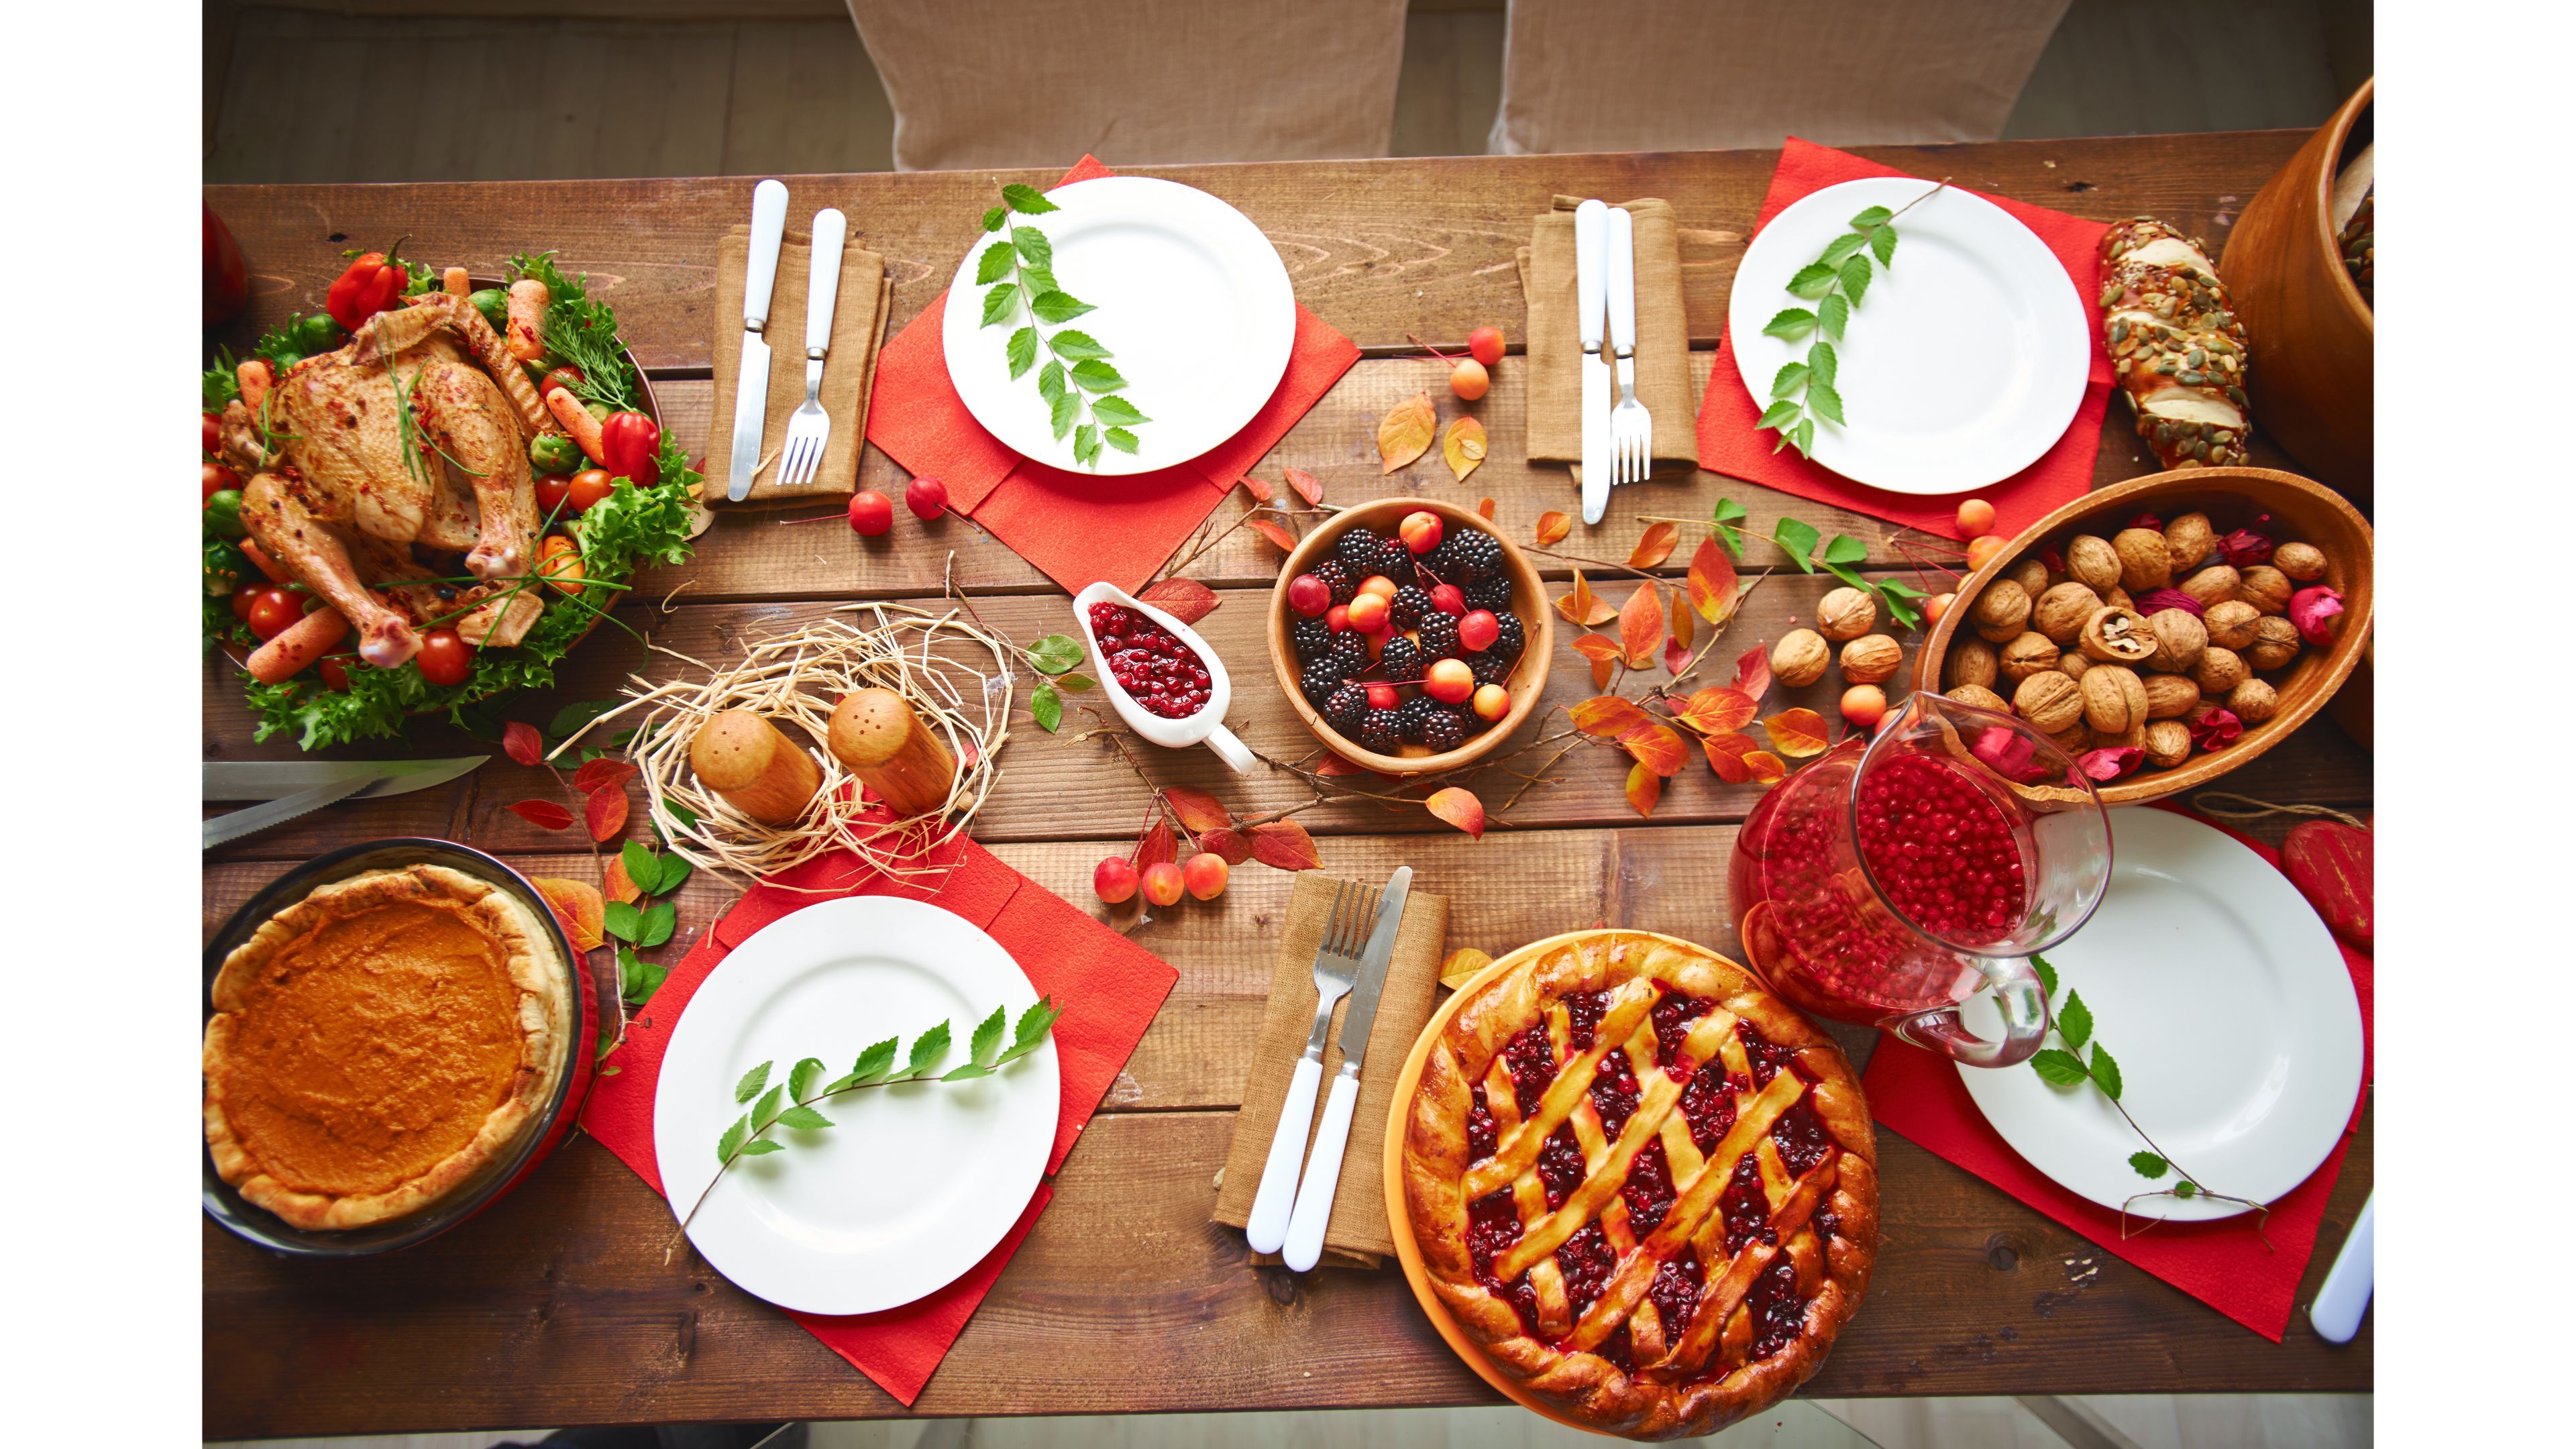 Best 47+ Thanksgiving Table Wallpapers on HipWallpapers